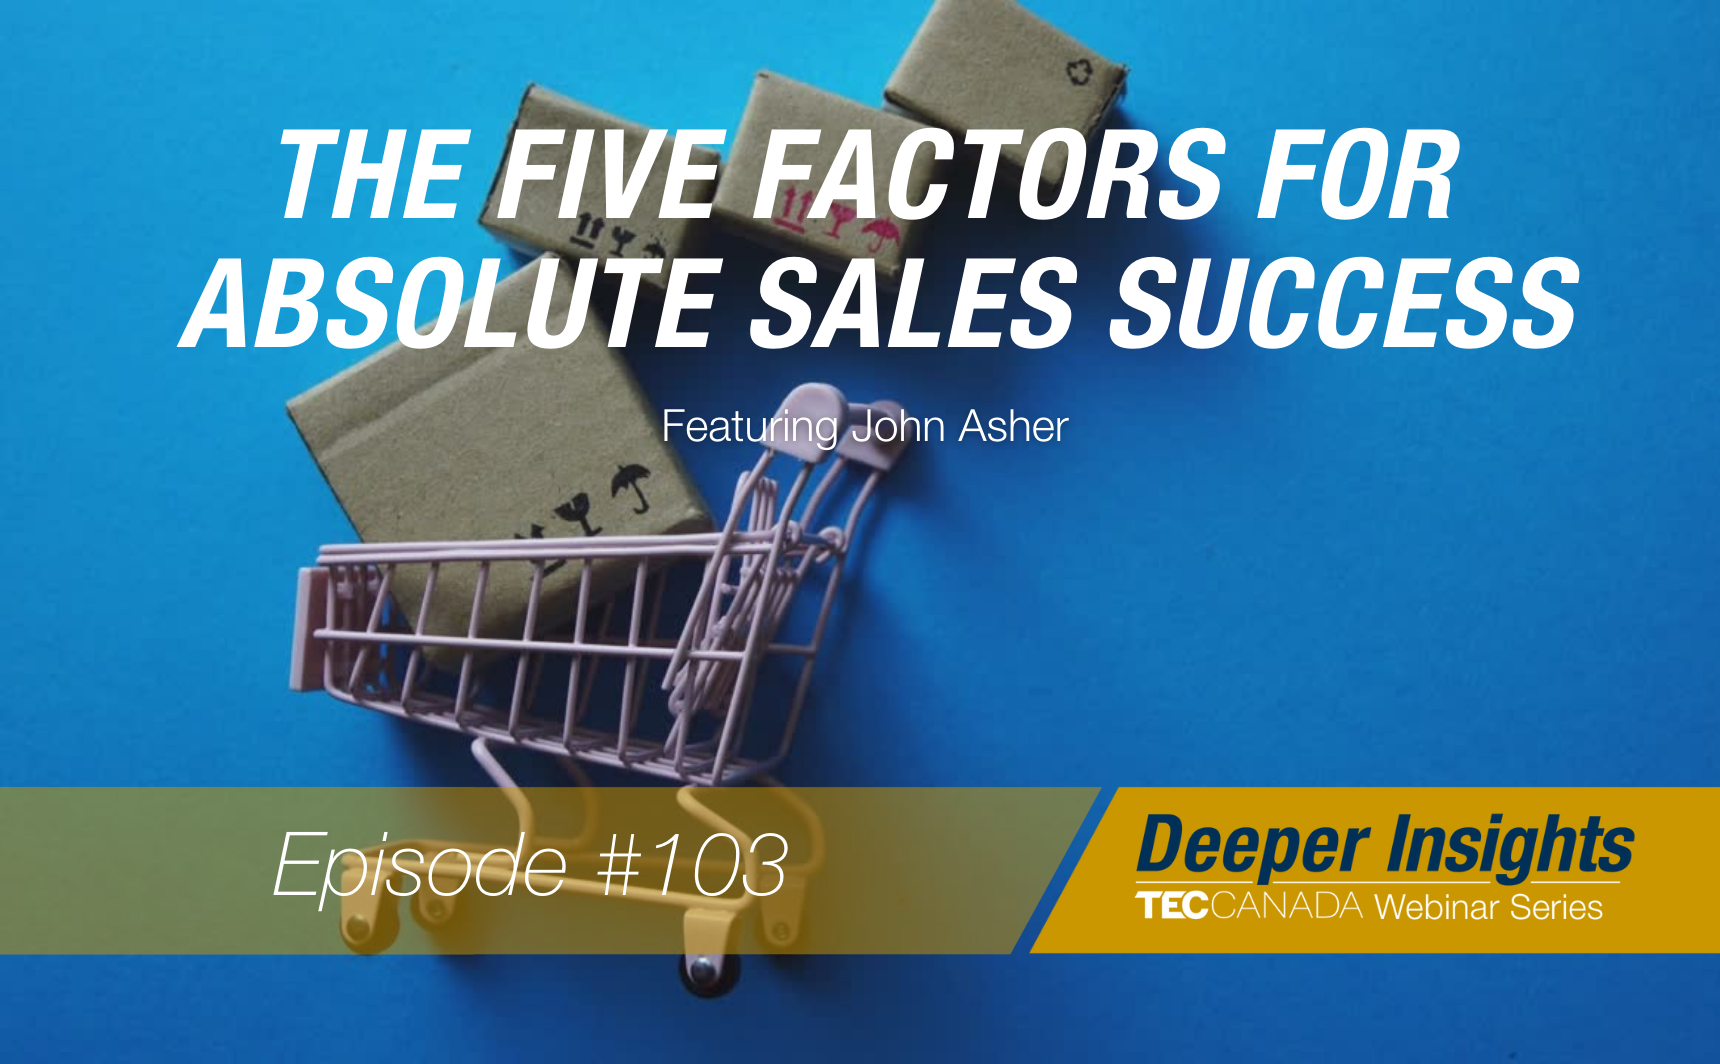 The Five Factors for Absolute Sales Success